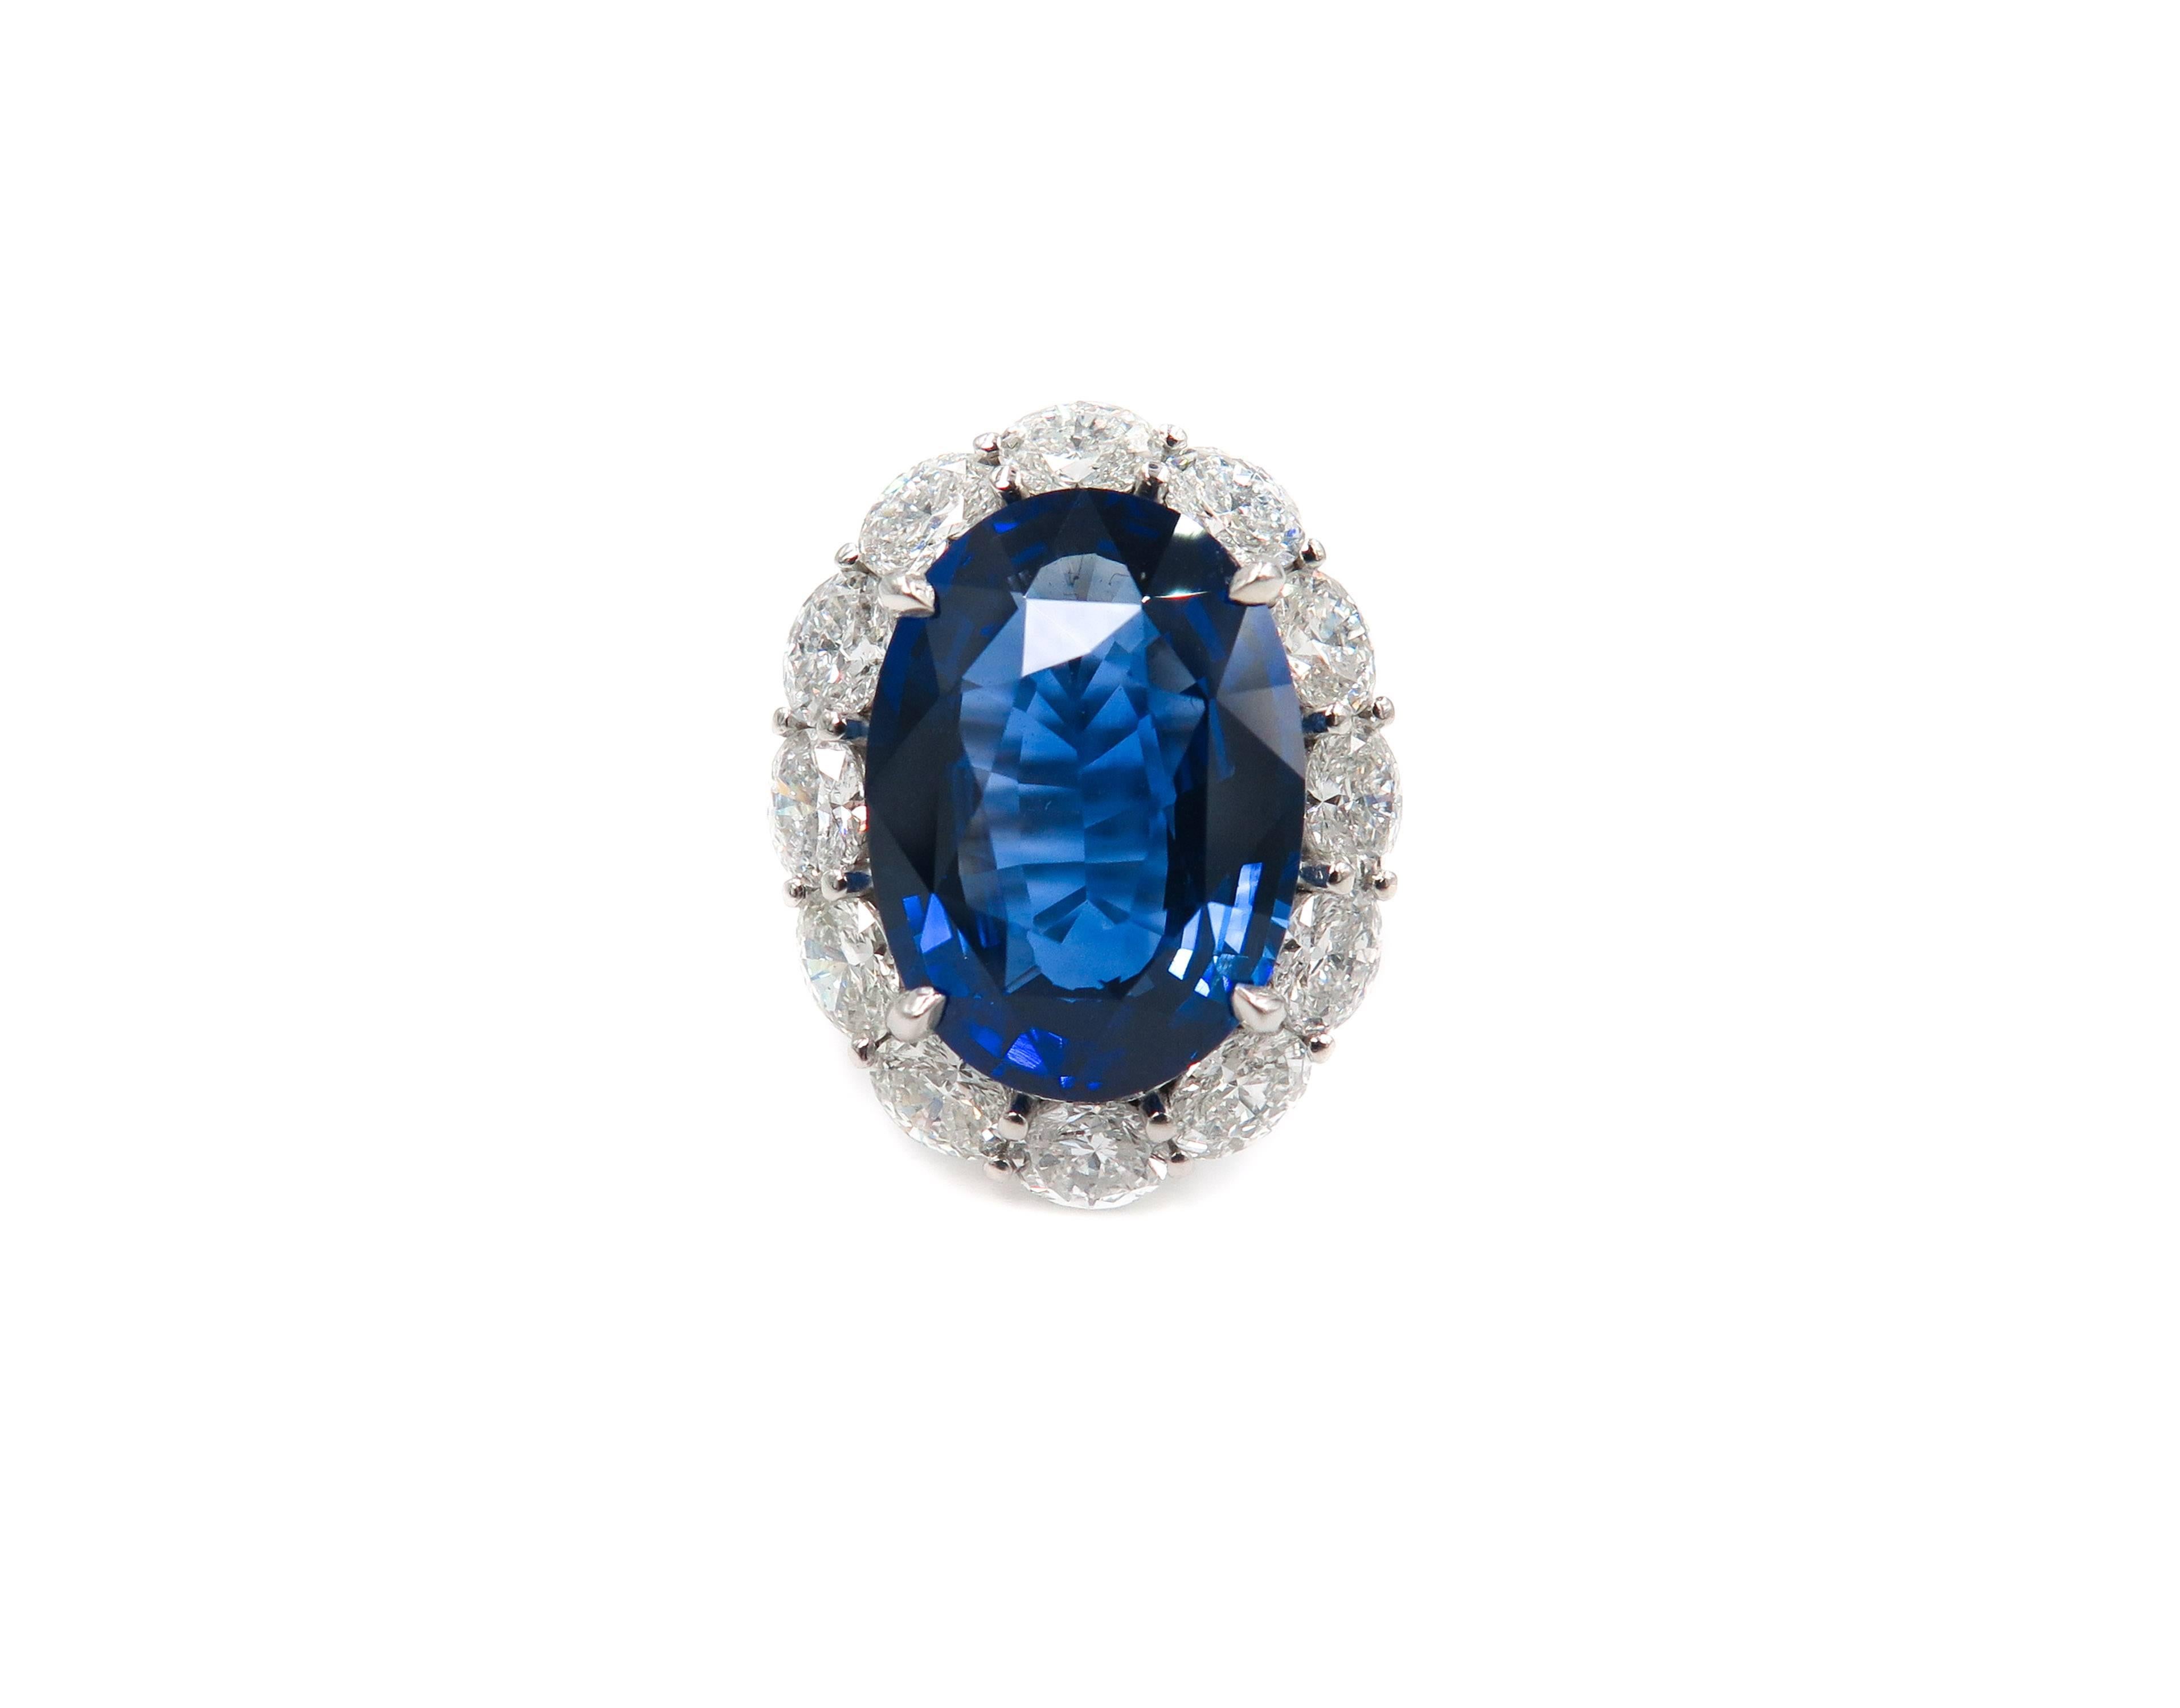 Neoclassical 11.62 Carat Oval Sapphire Diamond Cocktail Ring